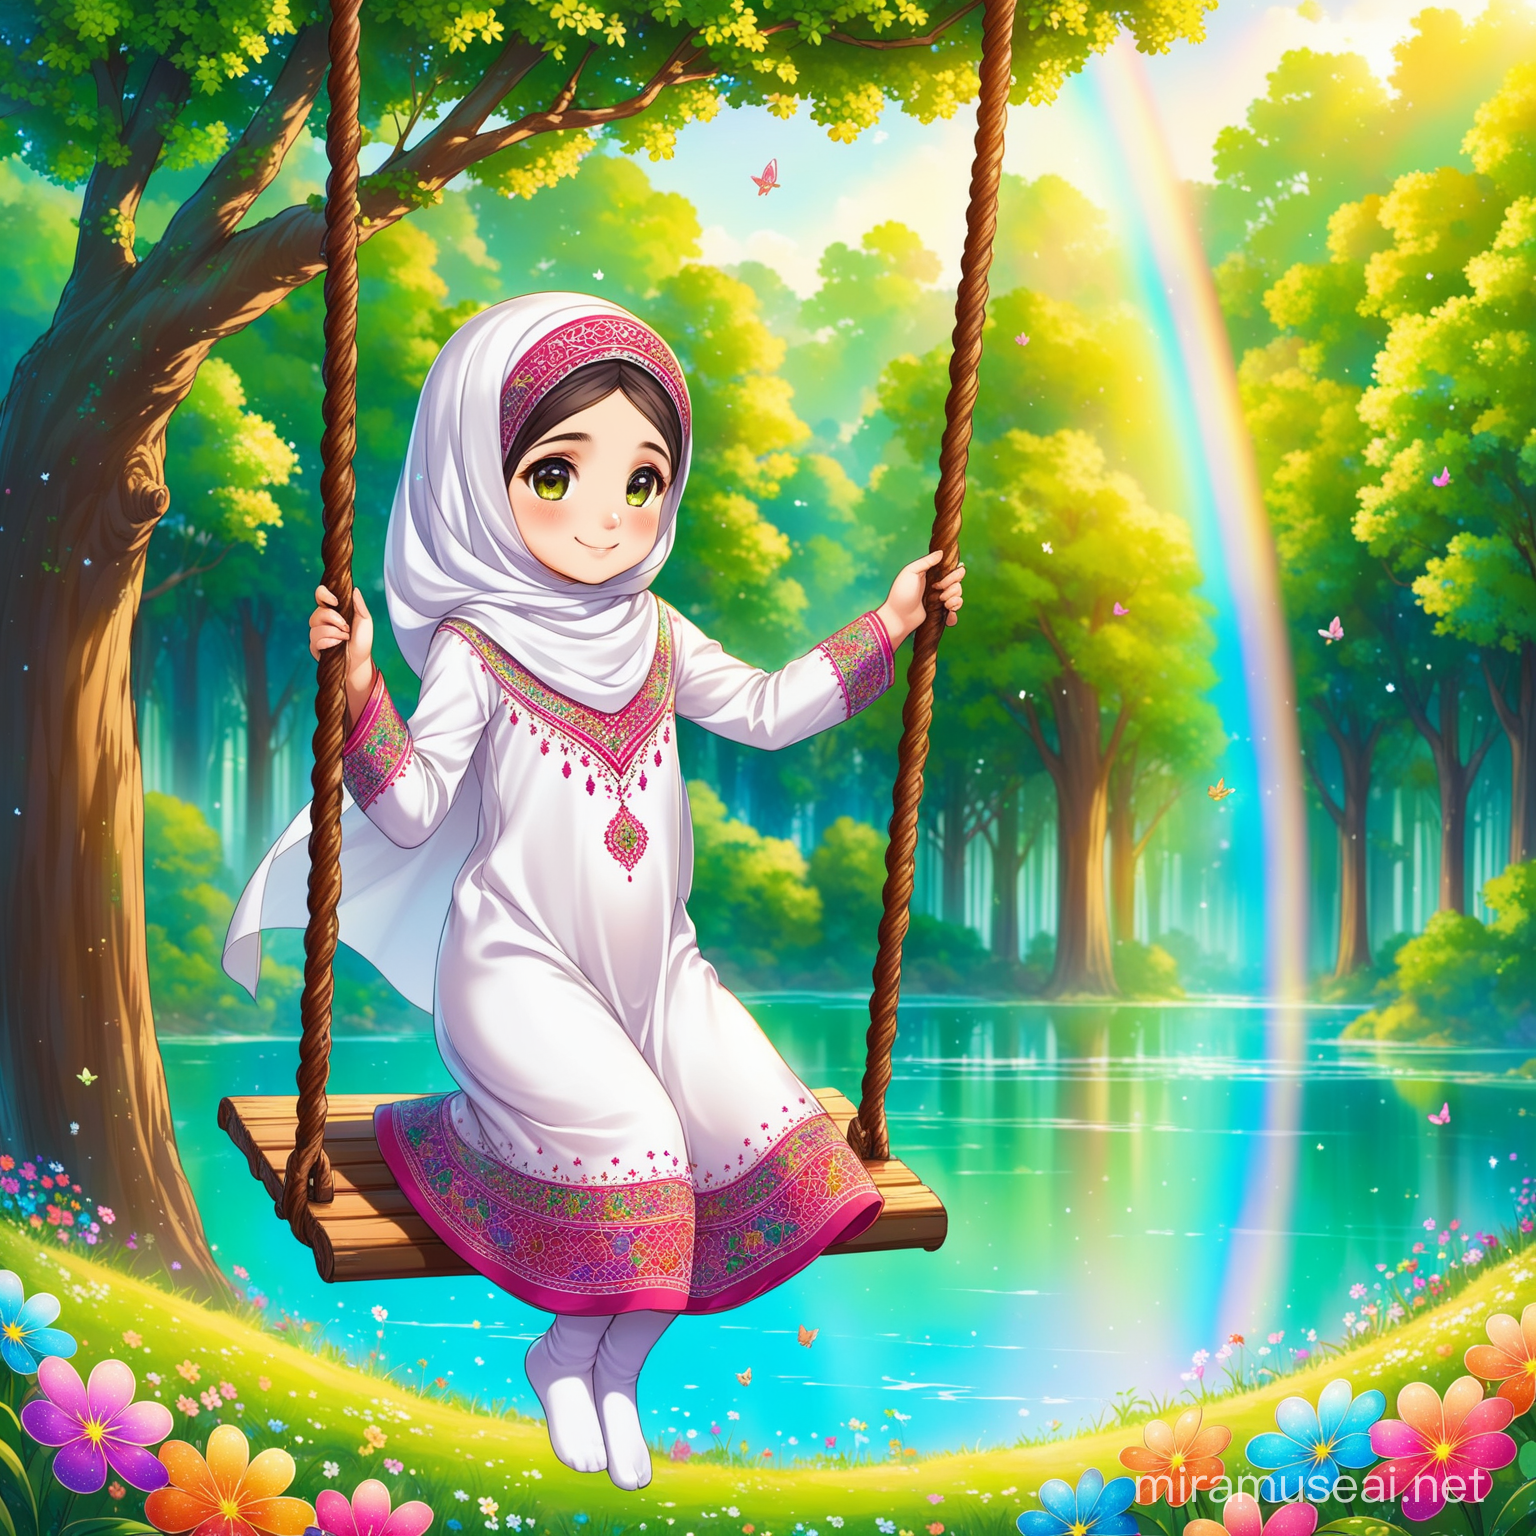 Persian little girl named Fatemeh.

Fatemeh is 9 years old Muslim, full height, no hair out of veil(Hijab), smaller eyes, bigger nose, white skin, cute, smiling, wearing socks, clothes with a lot of Persian designs.

Fatemeh is swinging, the swing is hanged to a tree branch.

Atmosphere forest, grass, rainbow flowers, spring, lake.